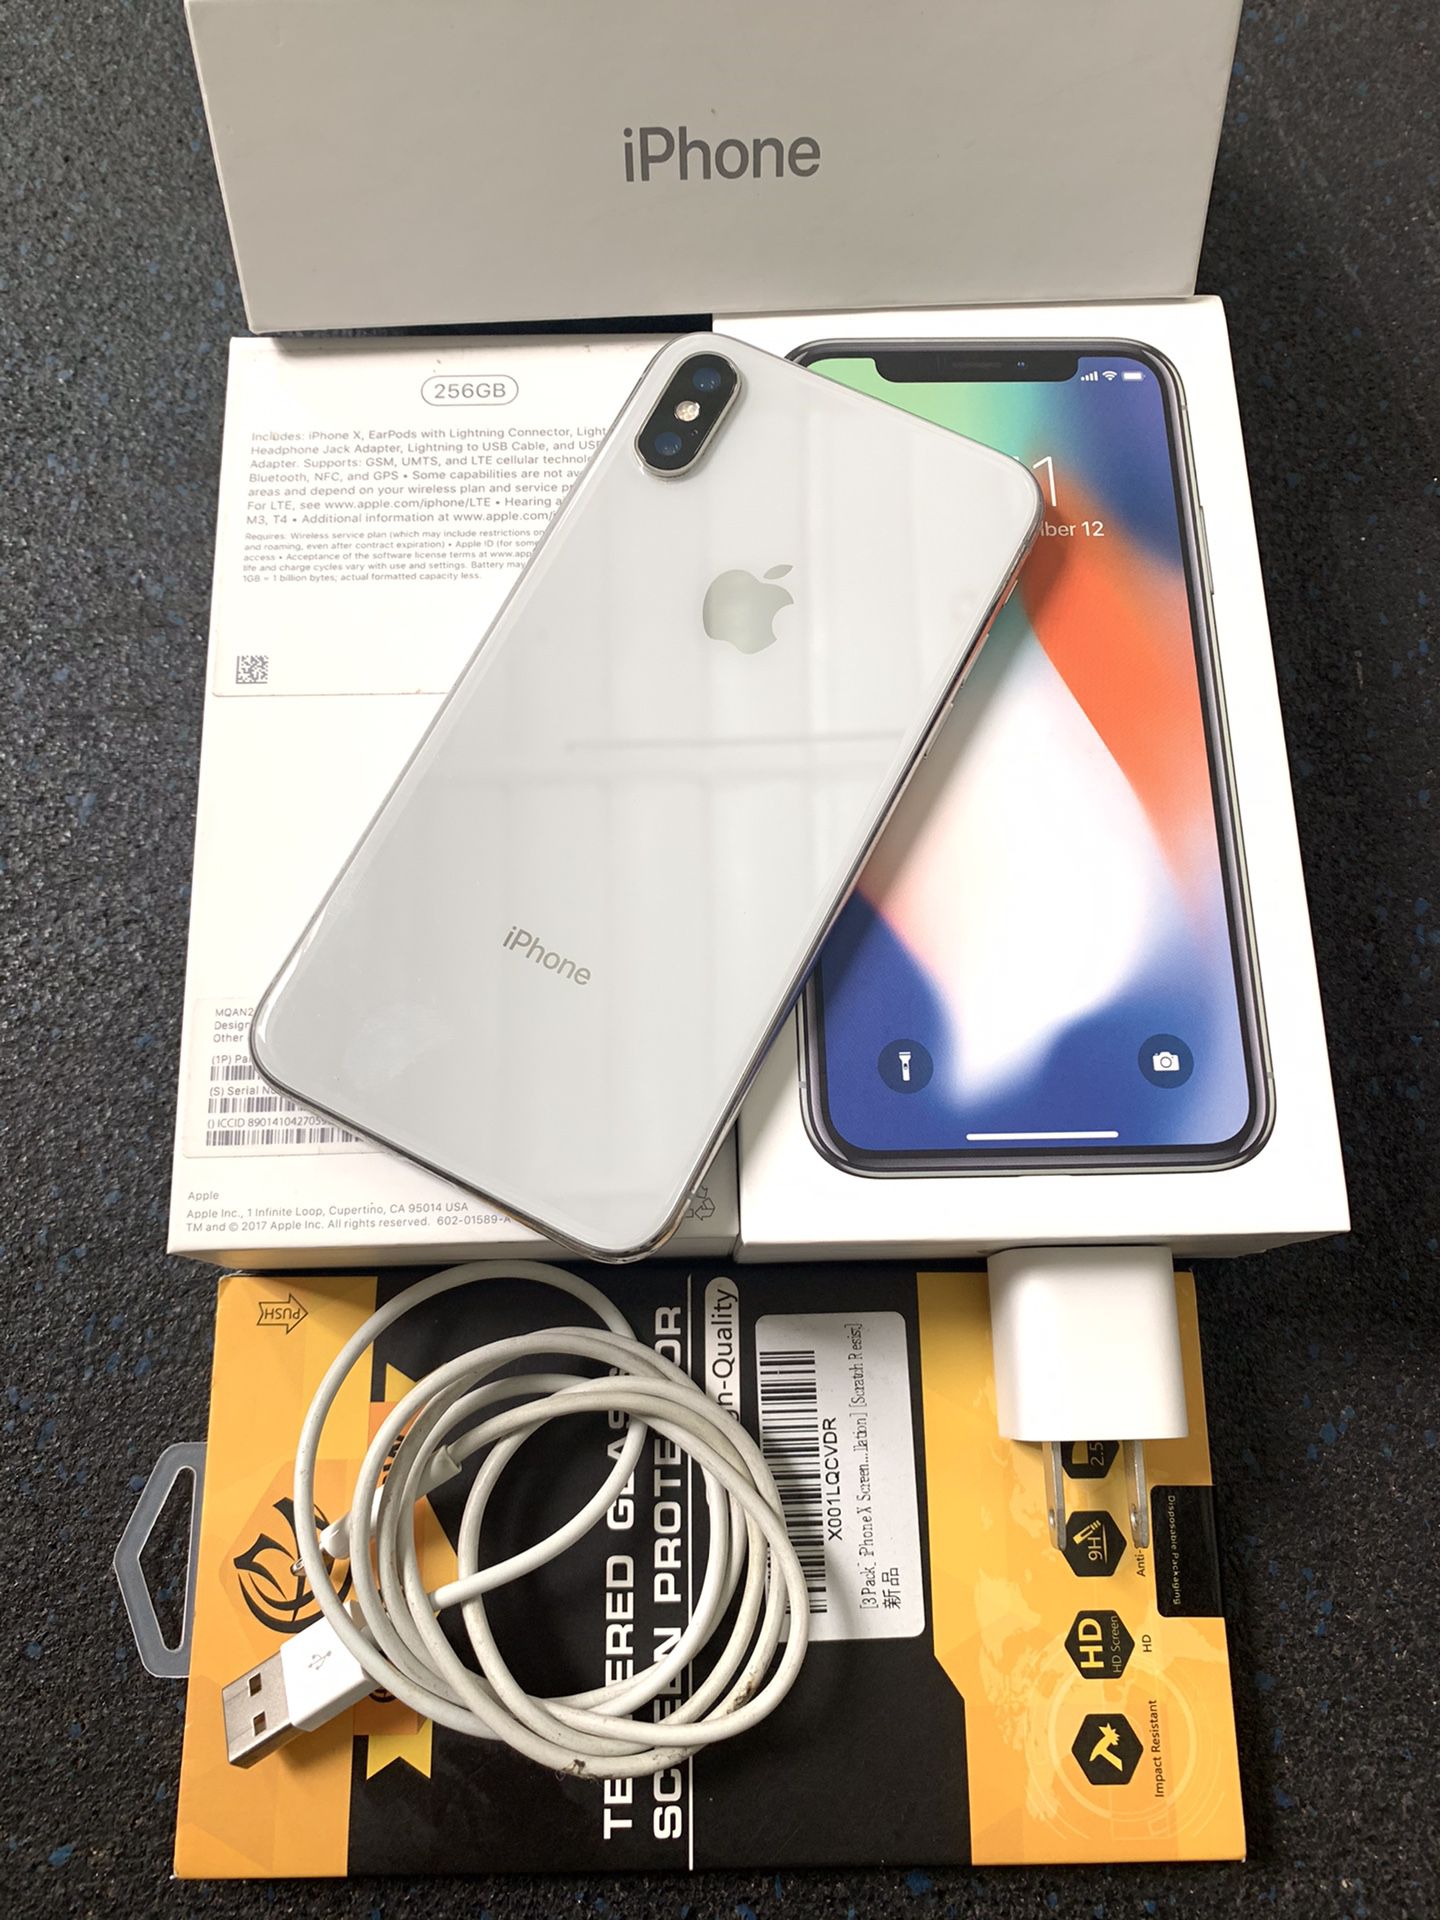 📲256GB IPHONE X UNLOCKED WORKS WITH ANY CELLPHONE COMPANY ACCESSORIES+RECEIPT PROOF ITS PAID OFF AND UNLOCKED